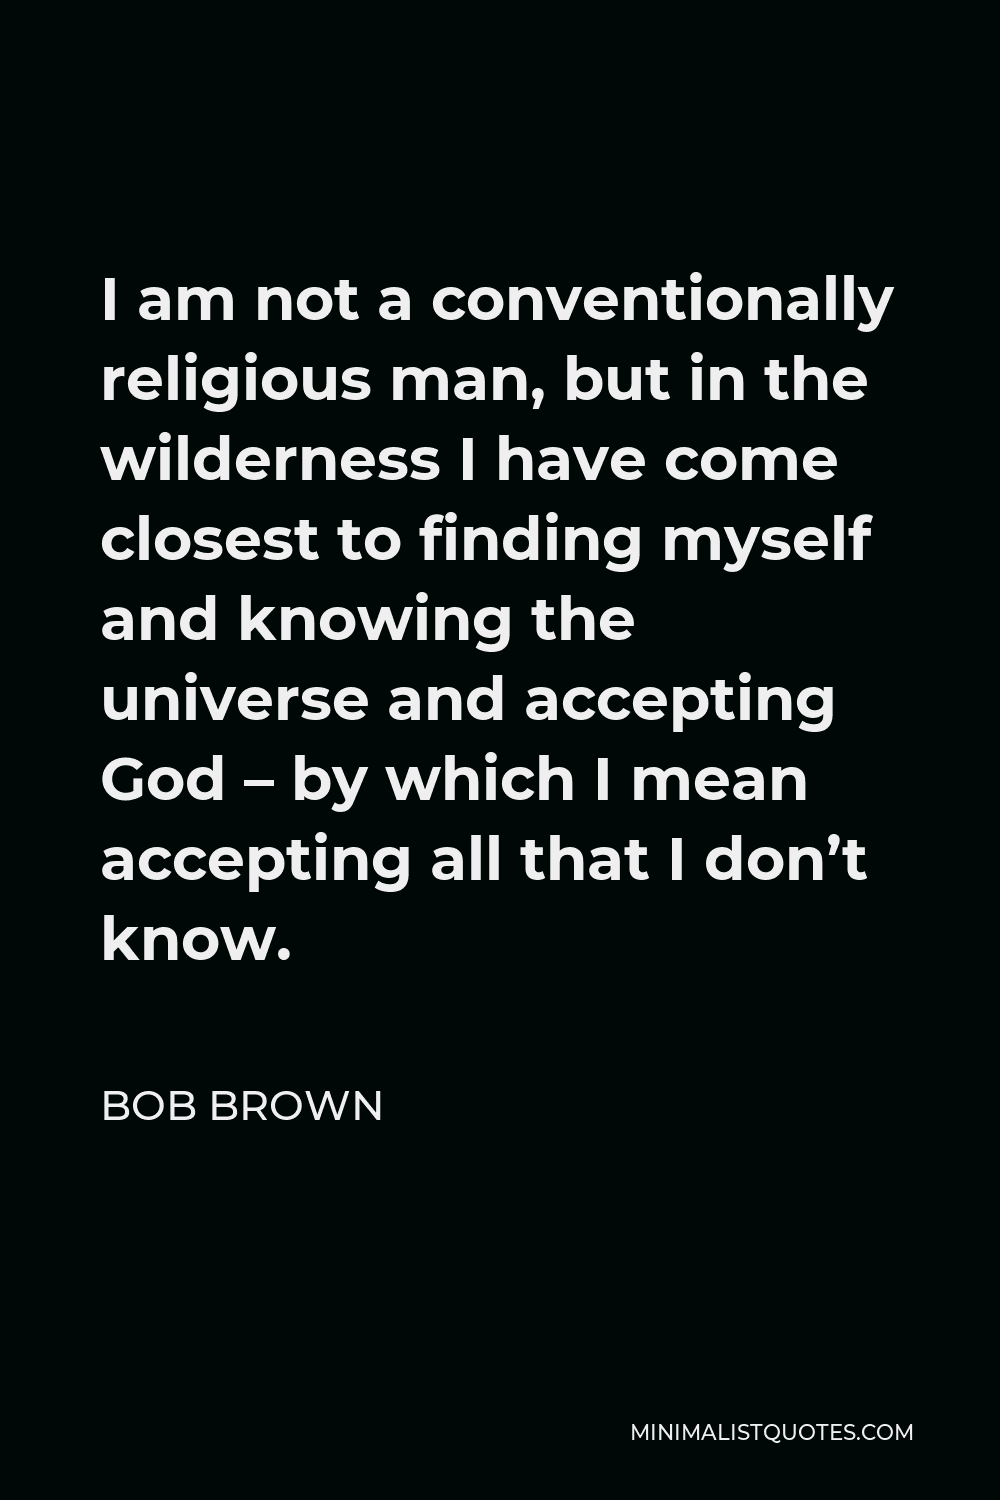 Bob Brown Quote - I am not a conventionally religious man, but in the wilderness I have come closest to finding myself and knowing the universe and accepting God – by which I mean accepting all that I don’t know.